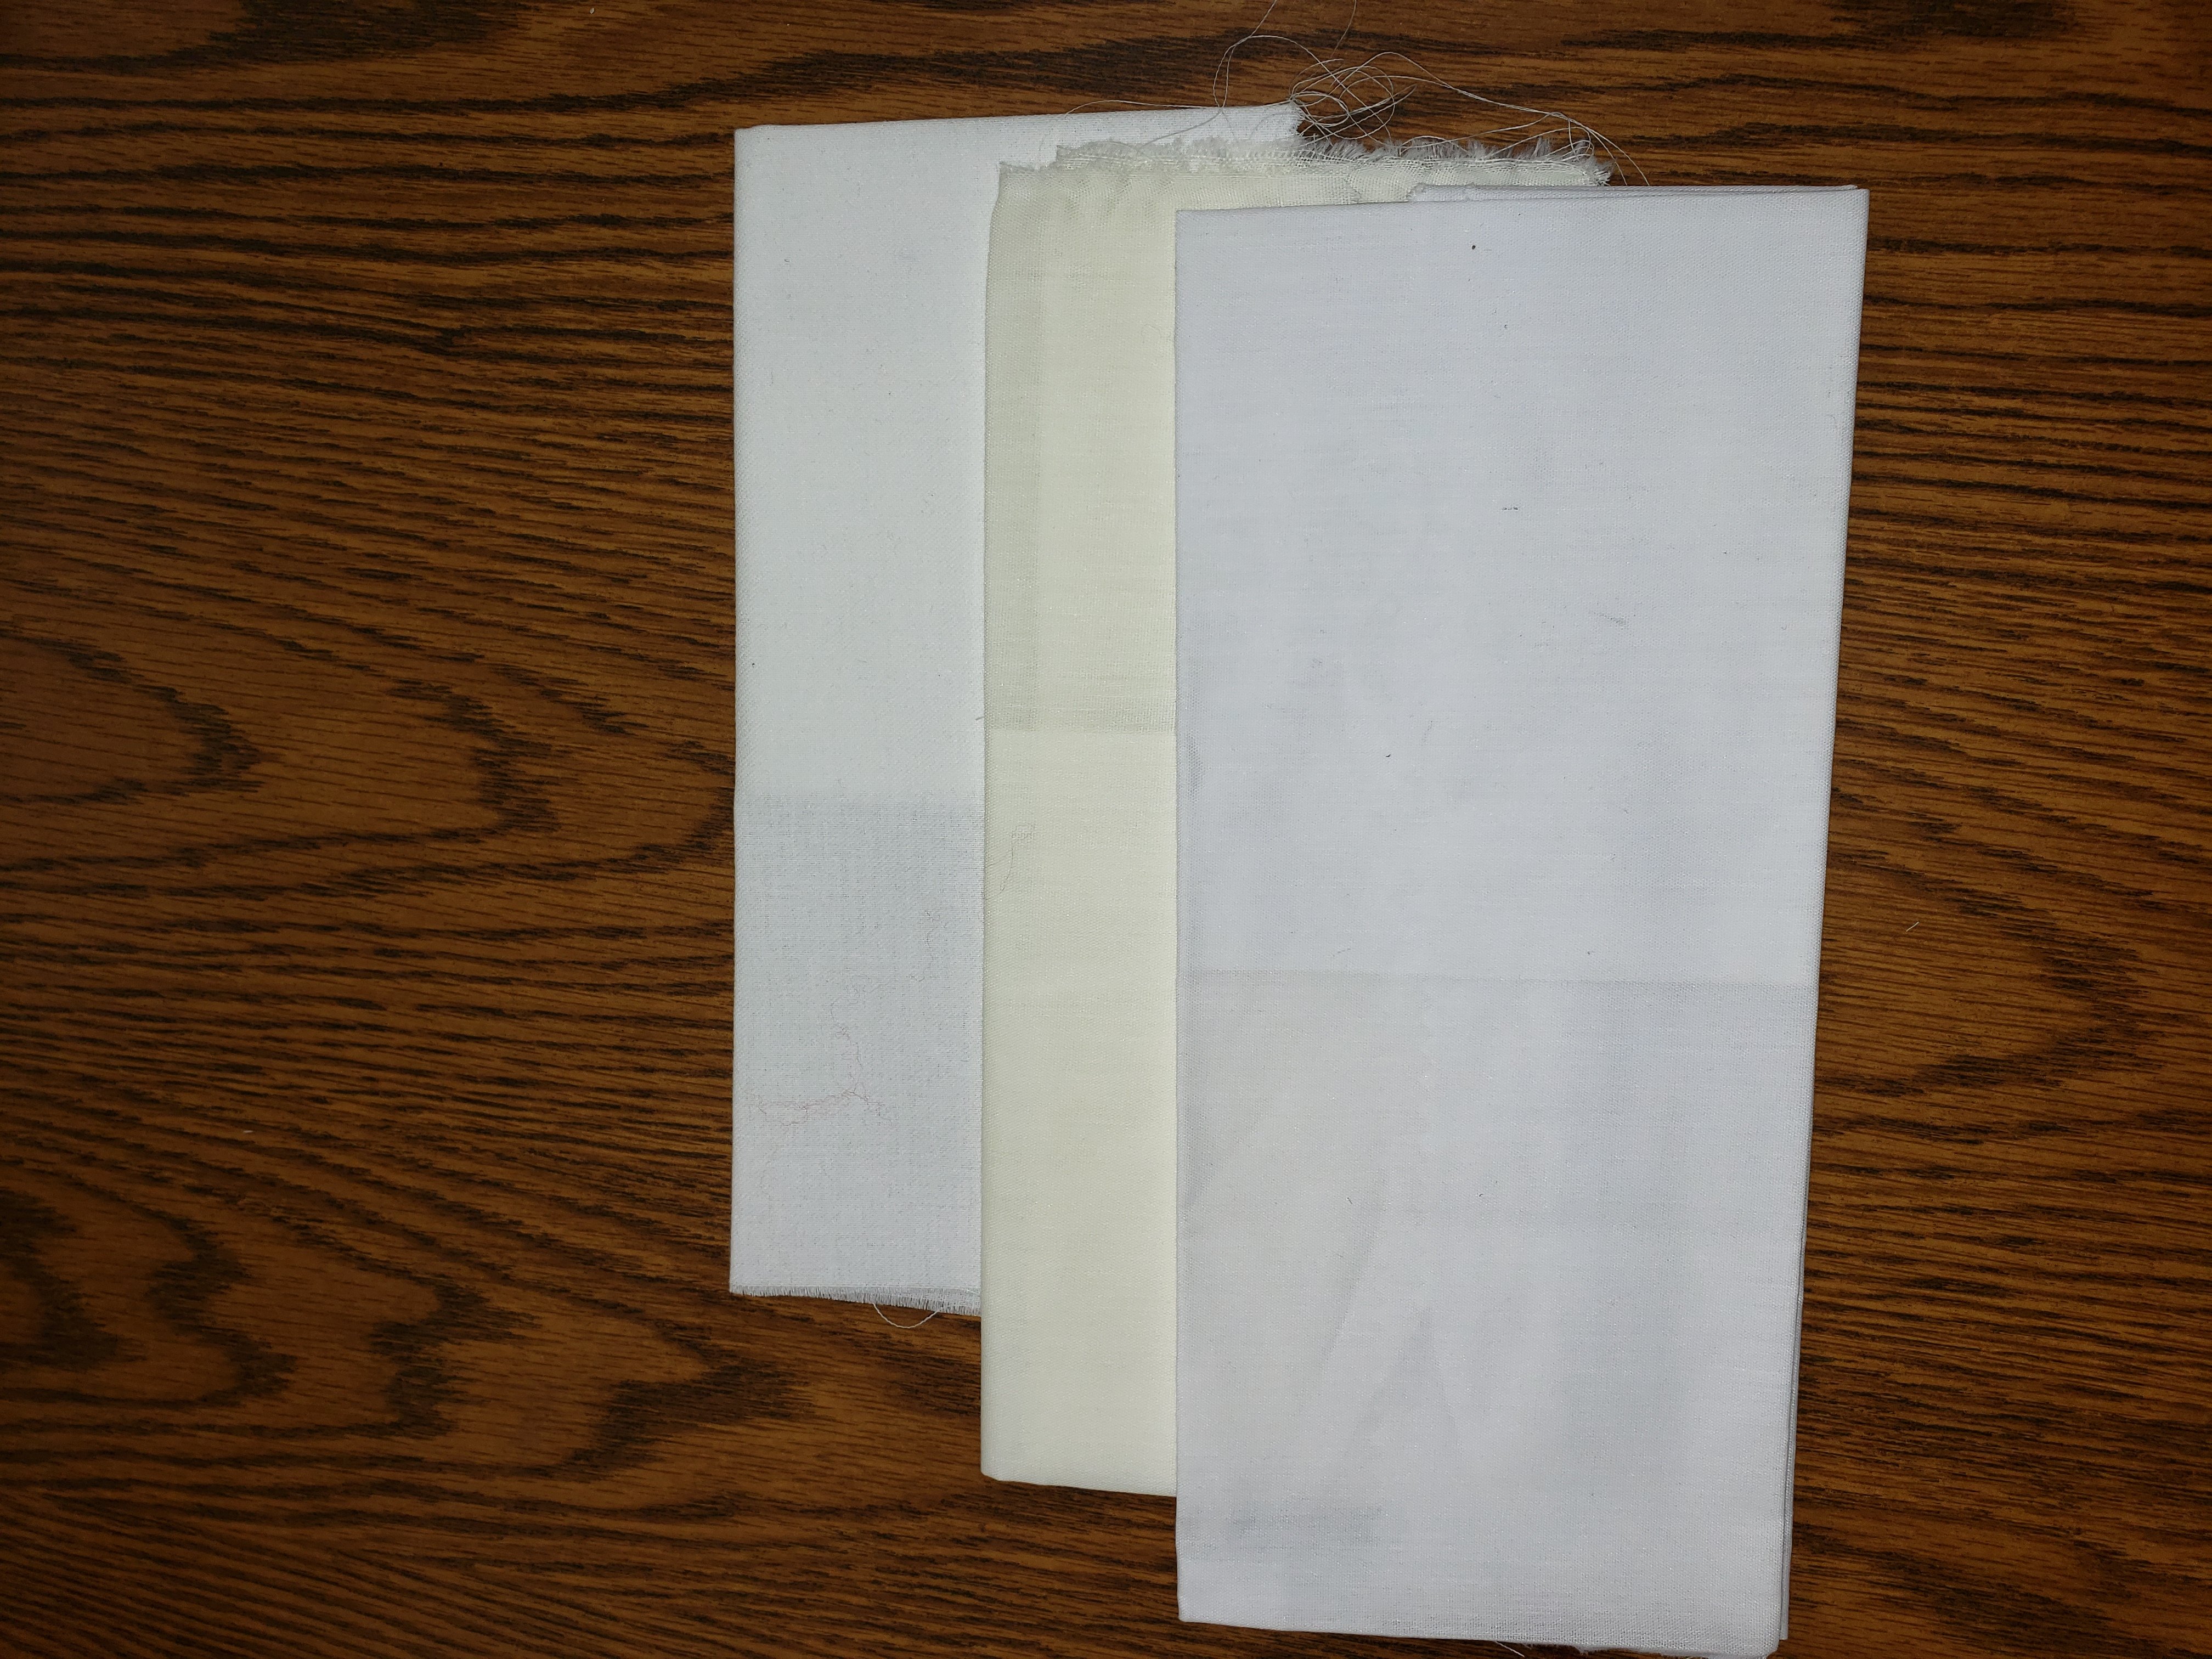 Lightweight Cotton Sheeting has Arrived! 100 gsm - Made in USA - Closeout Pricing